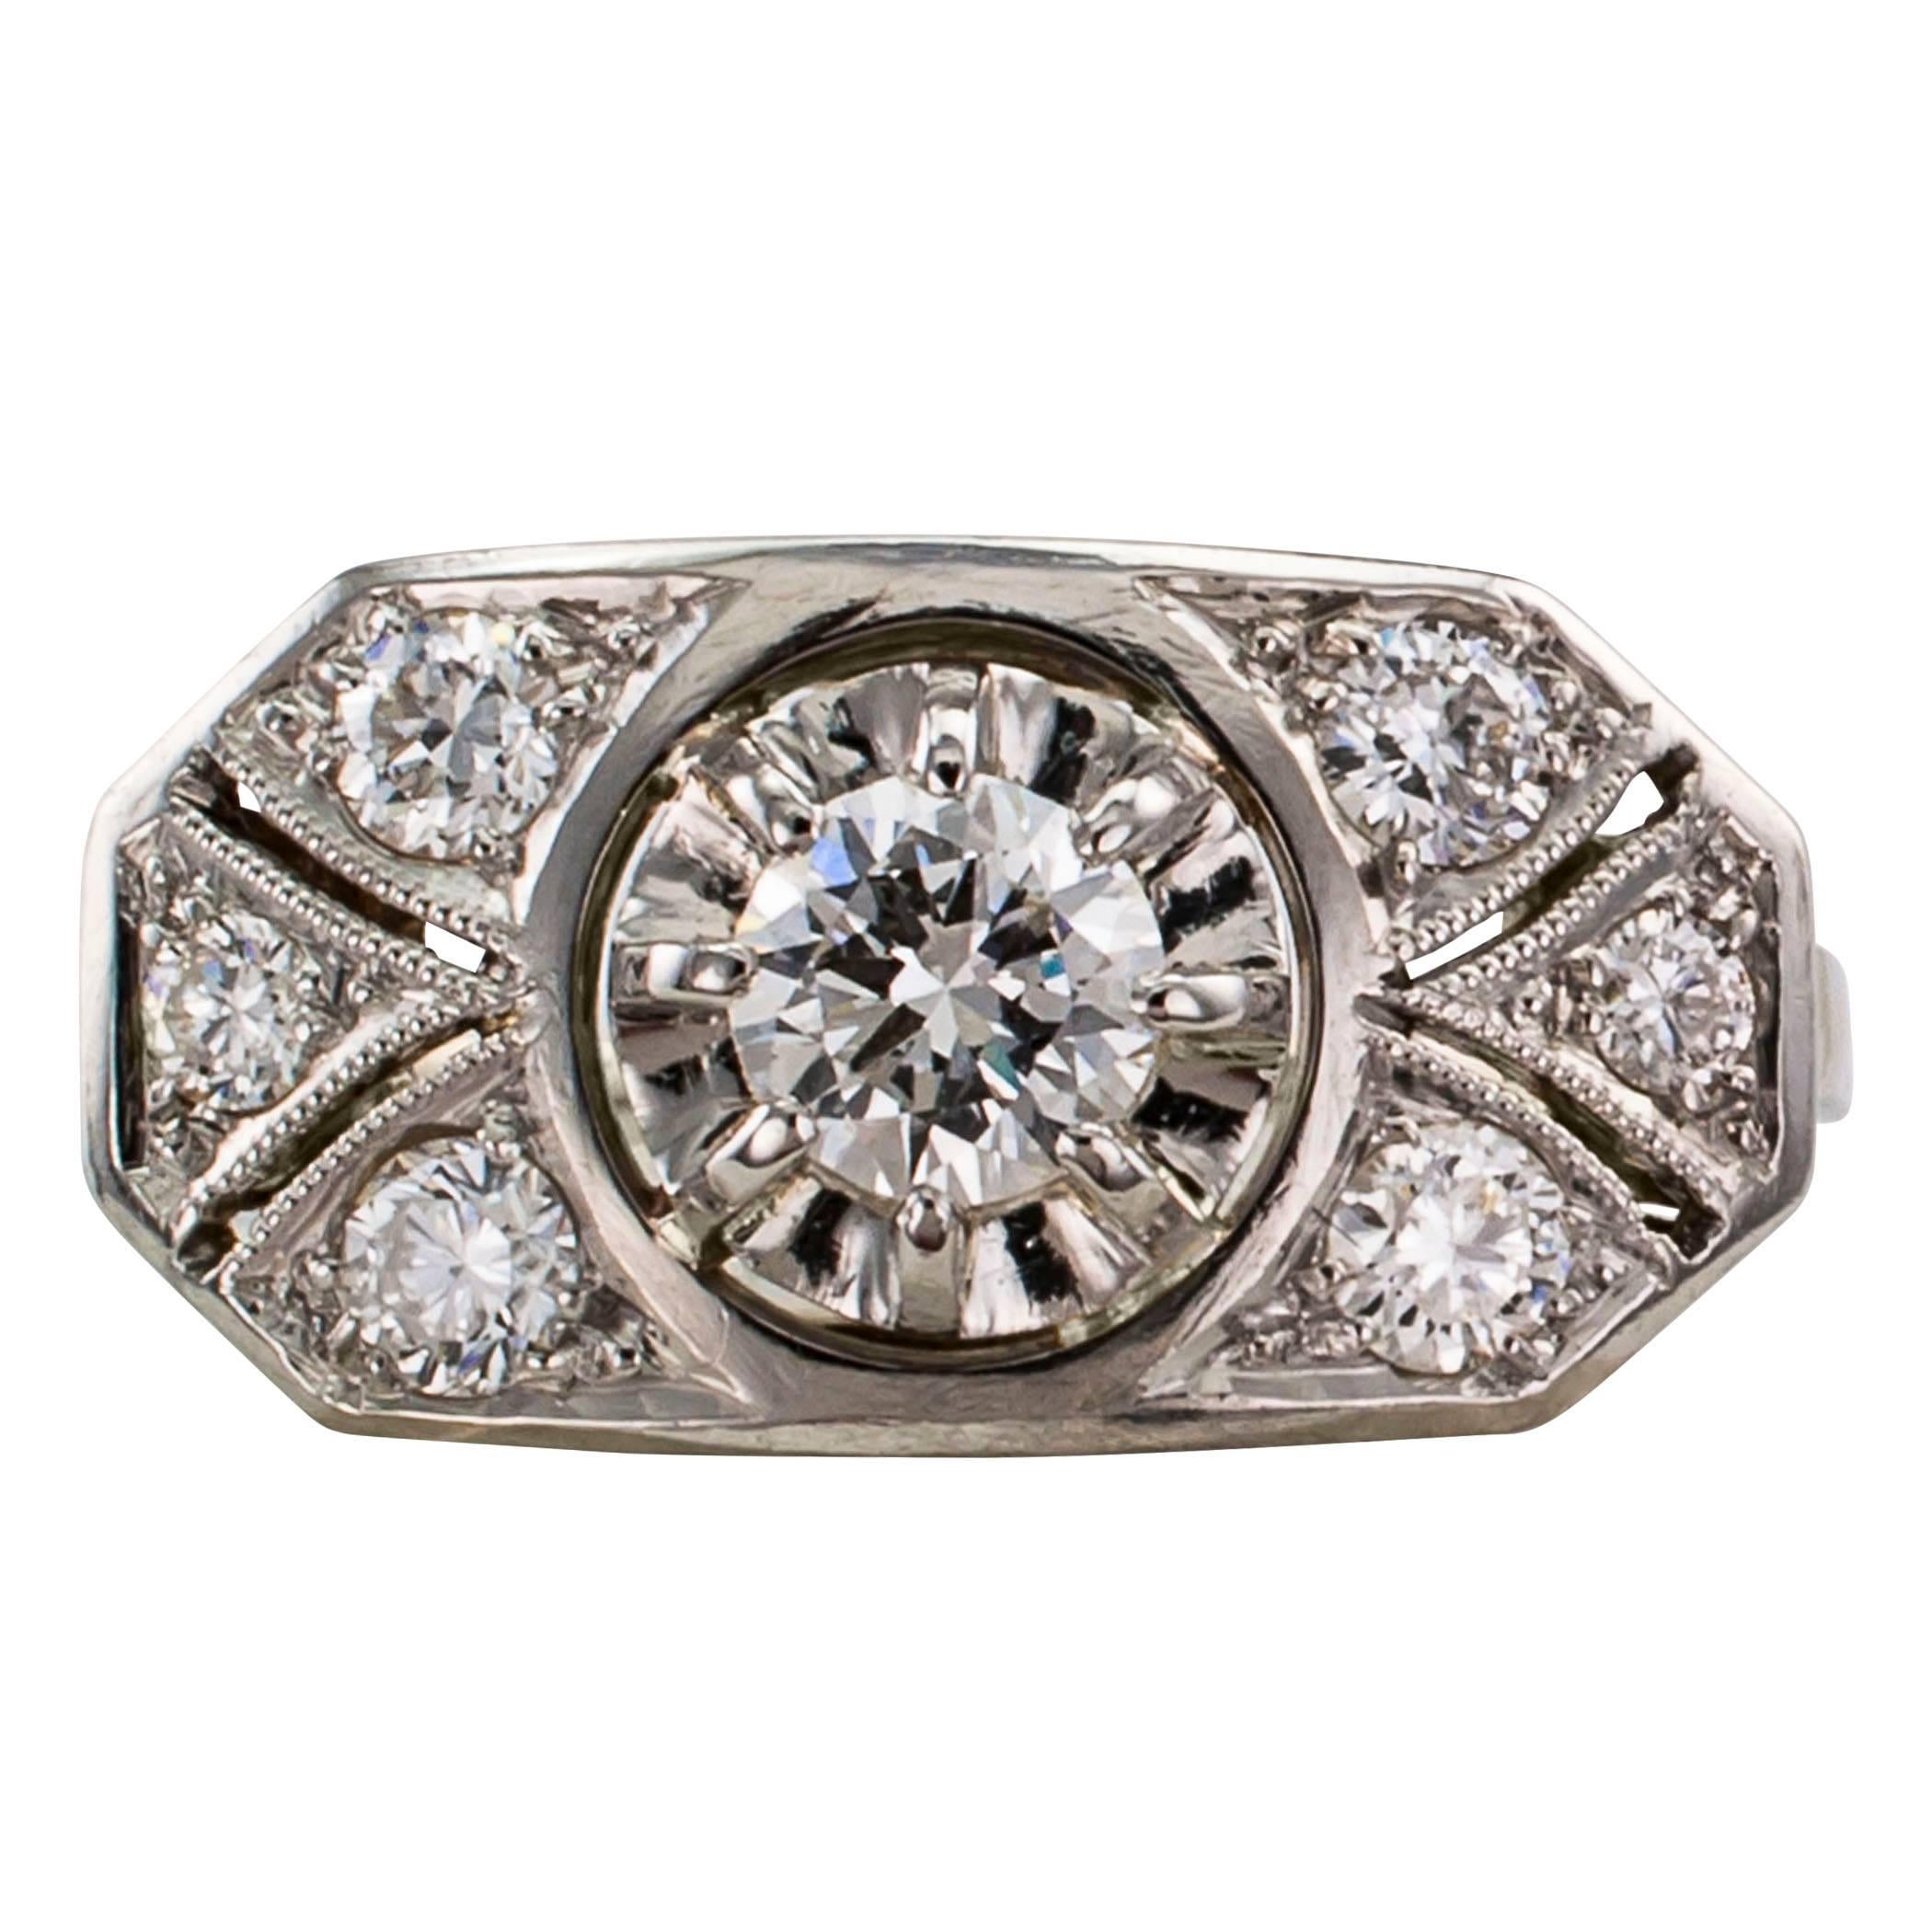 1940s diamond and white gold engagement ring.  The design centers upon  a round diamond weighing approximately 0.35 carat, approximately I color and VS clarity, prong set in an illusion head, typical of the period when it was made, within an